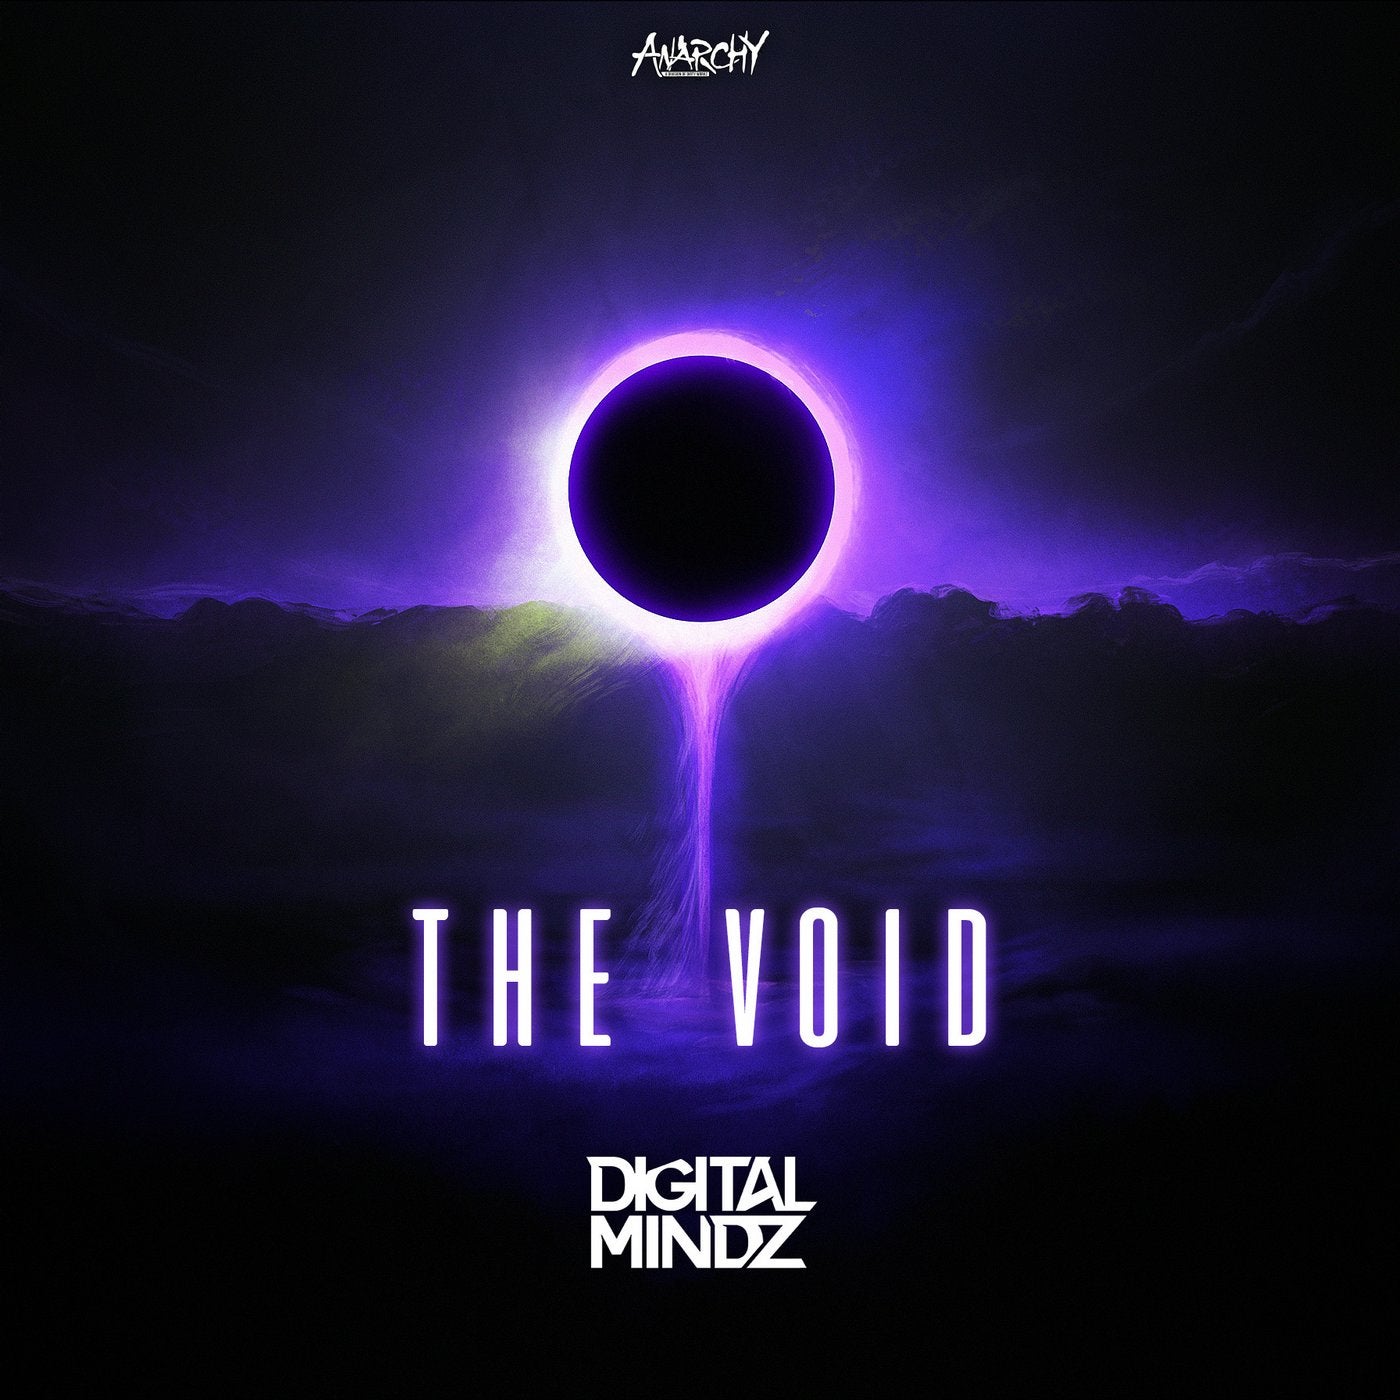 Void music. A Void. Digital Void. The Void 2016. Voices of the Void картинки.